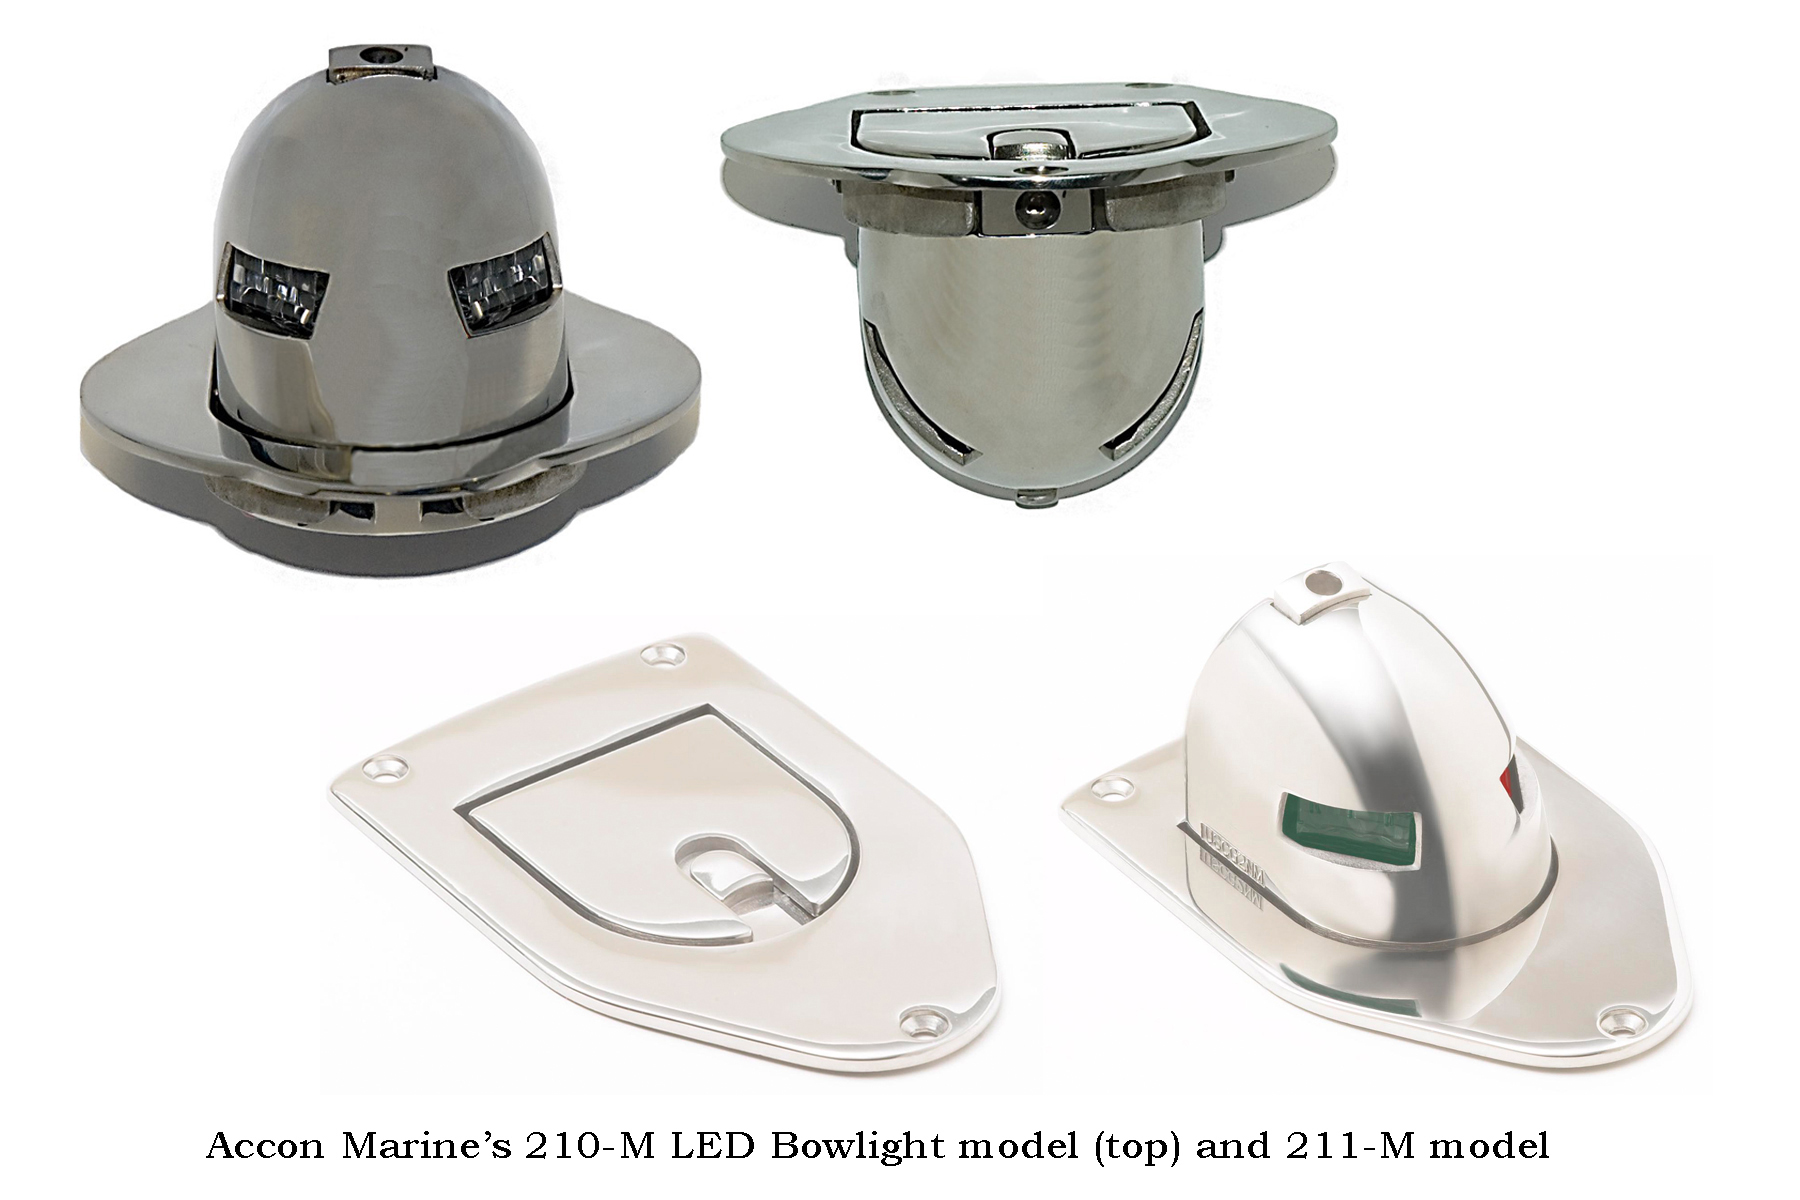 Product shot for Pop-up LED NAV light from Accon Marine